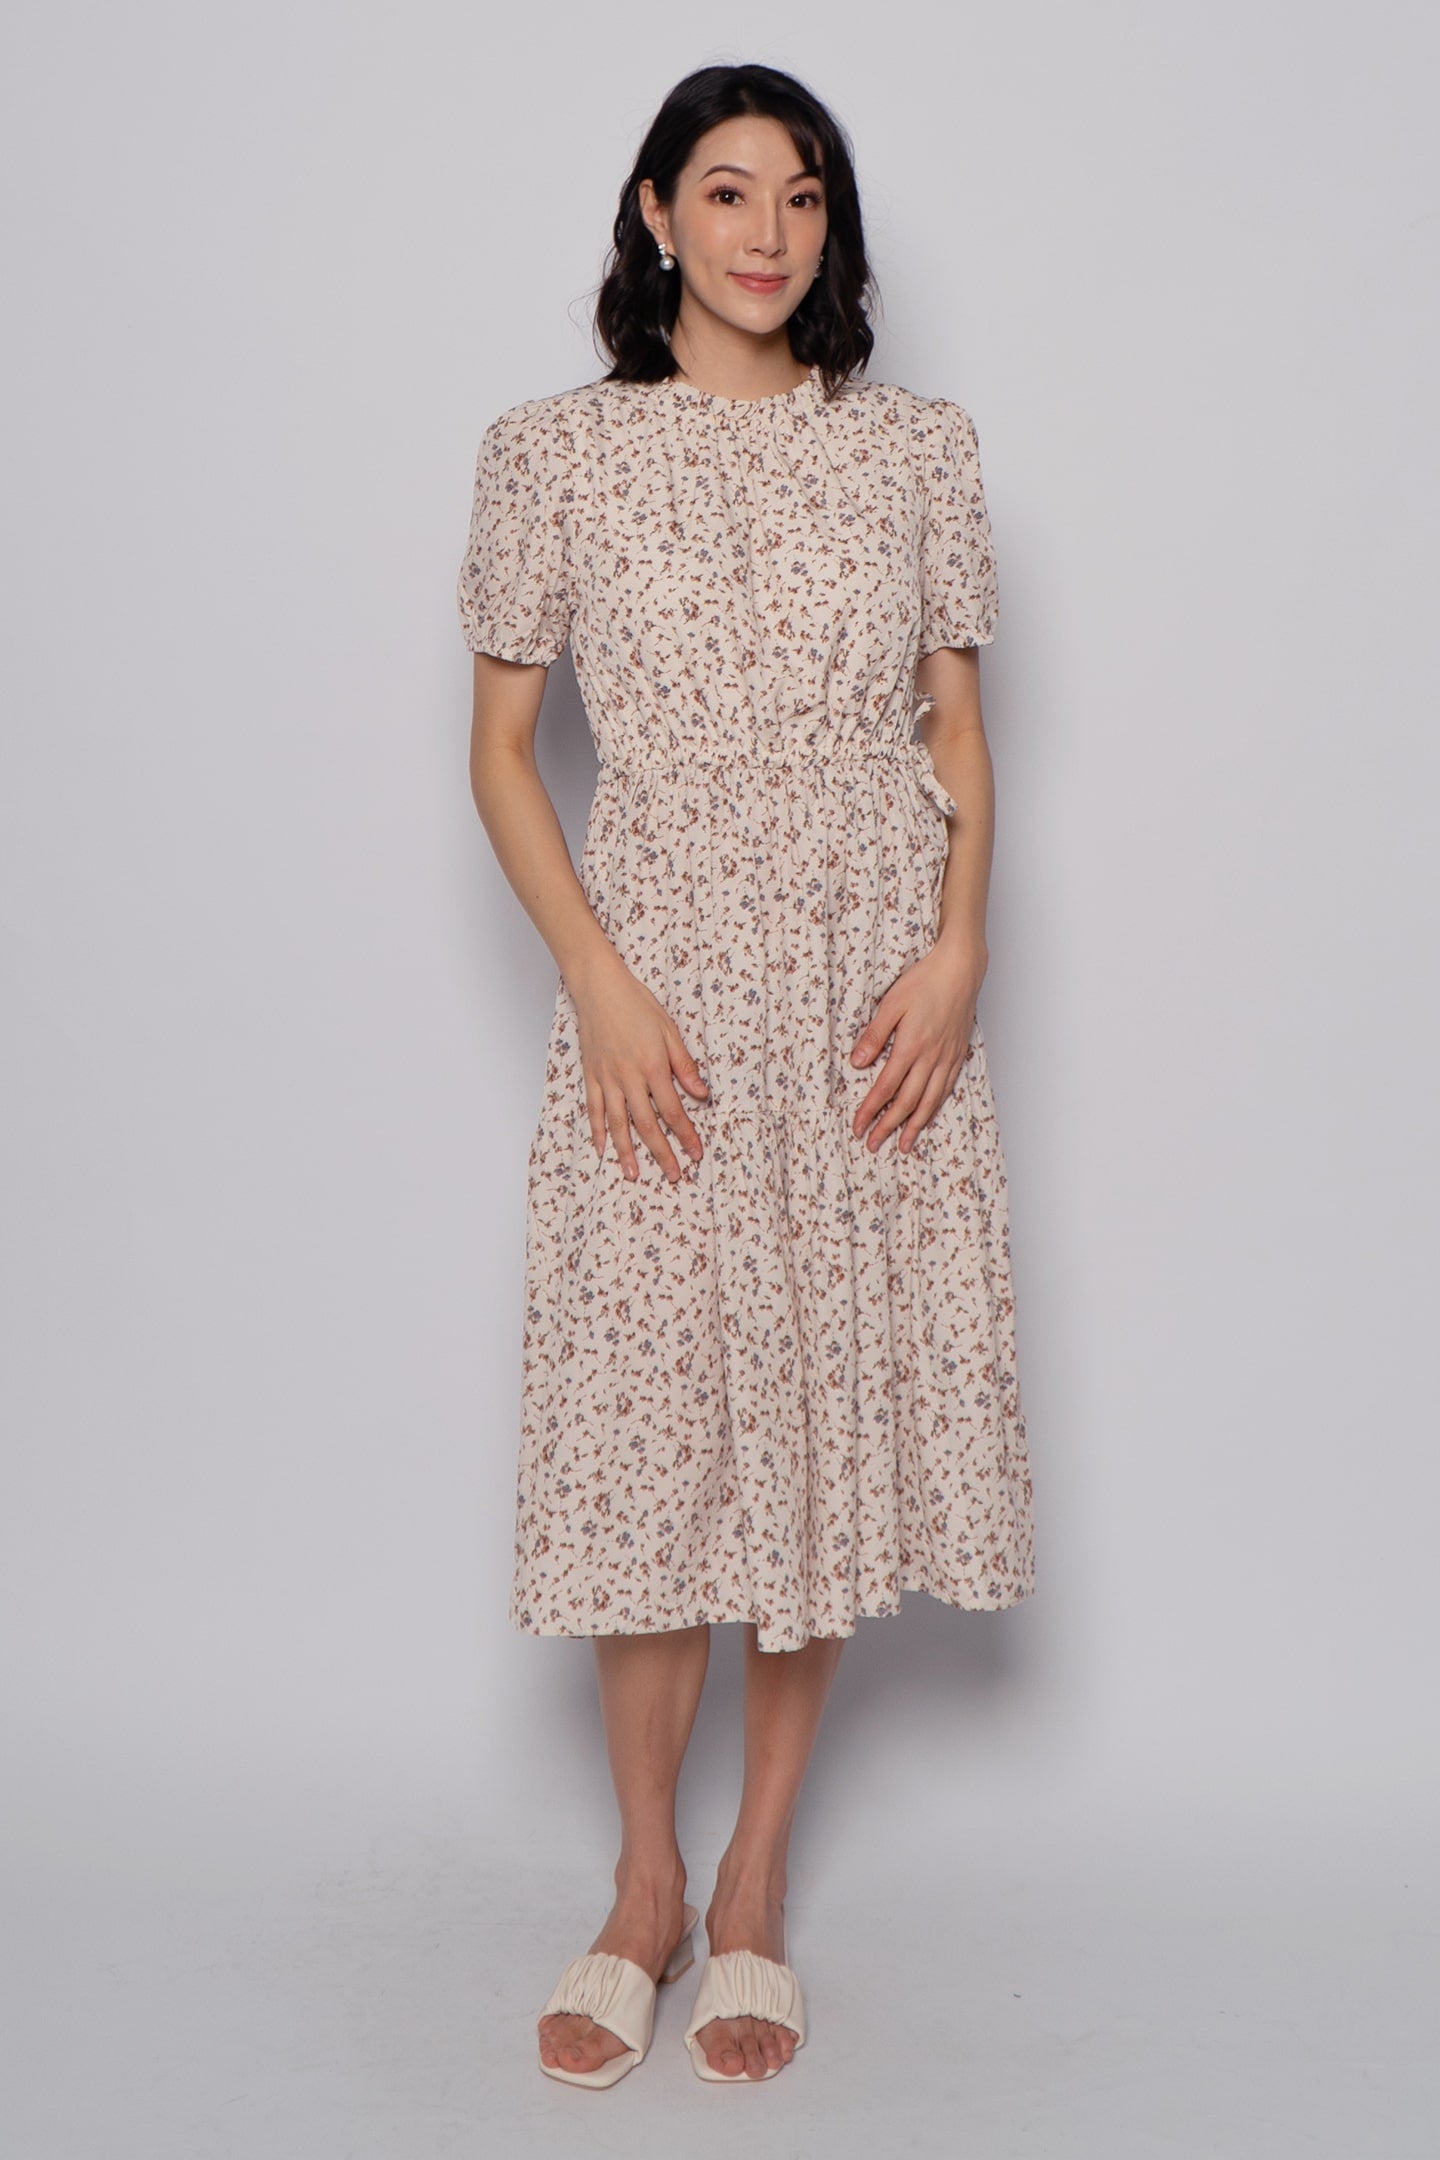 Kalila Floral Dress in Cream